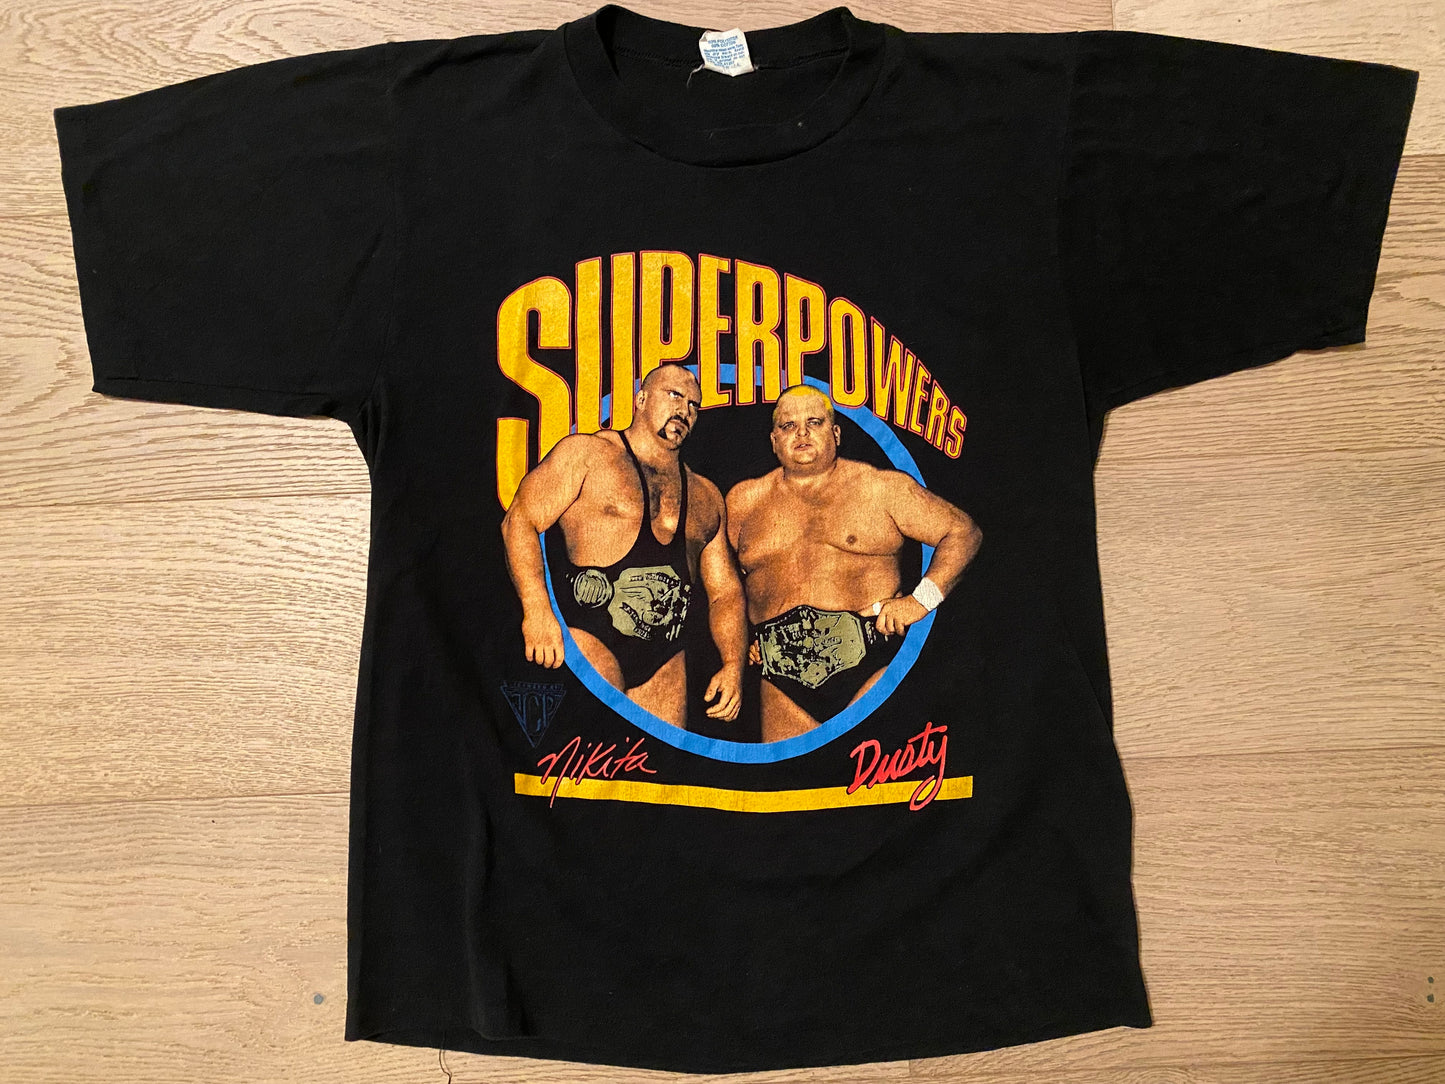 1987 NWA JCP Superpowers shirt featuring “The American Dream” Dusty Rhodes and Nikita Koloff